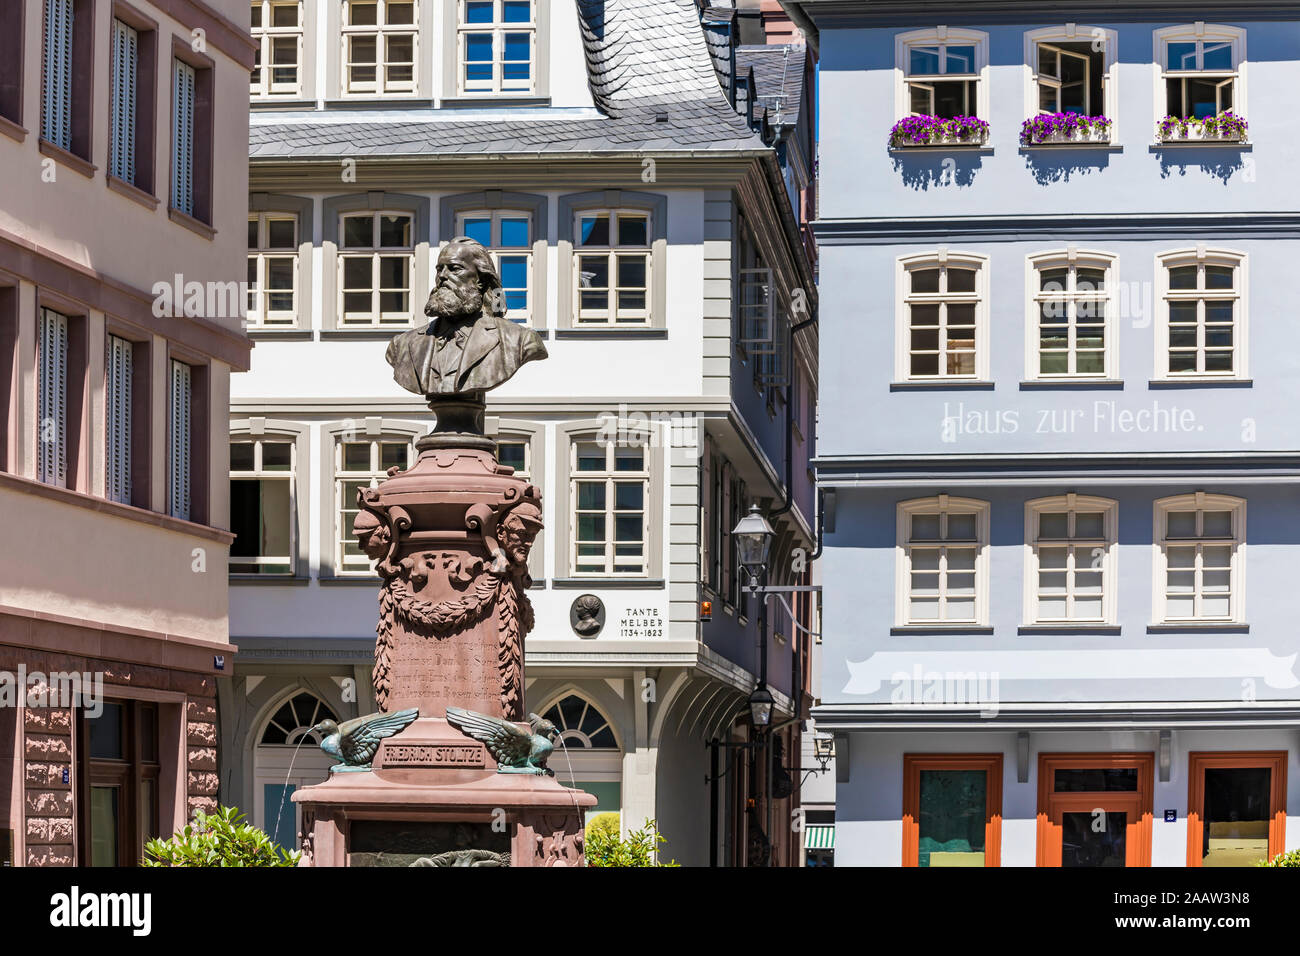 Stoltze fountain against buildings in Frankfurt, Germany Stock Photo